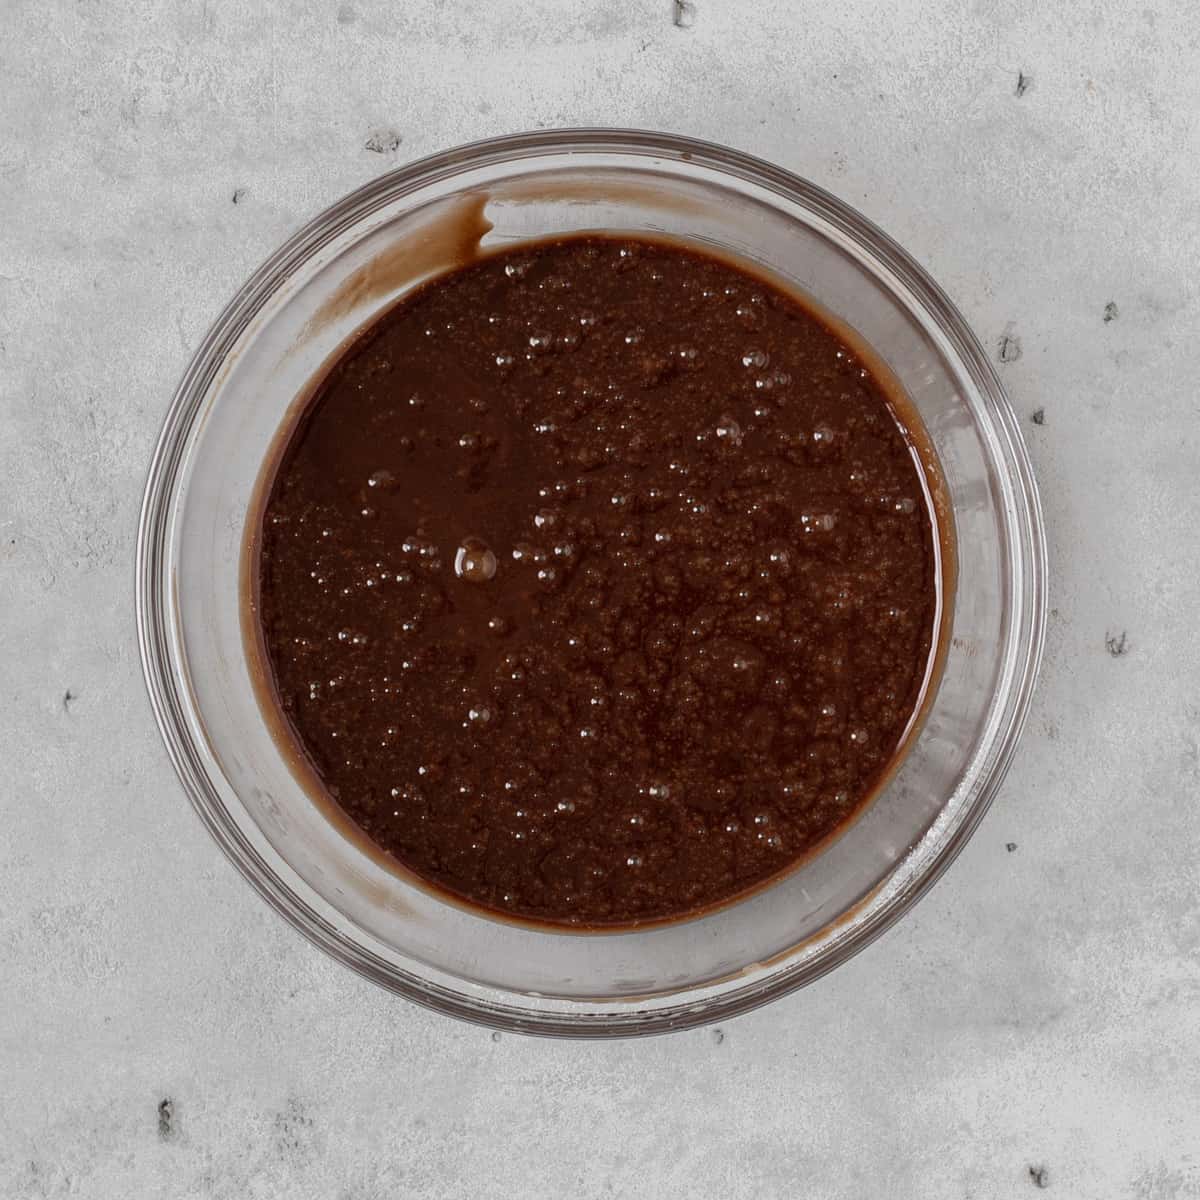 the completed lava cake batter in a glass bowl on a grey background